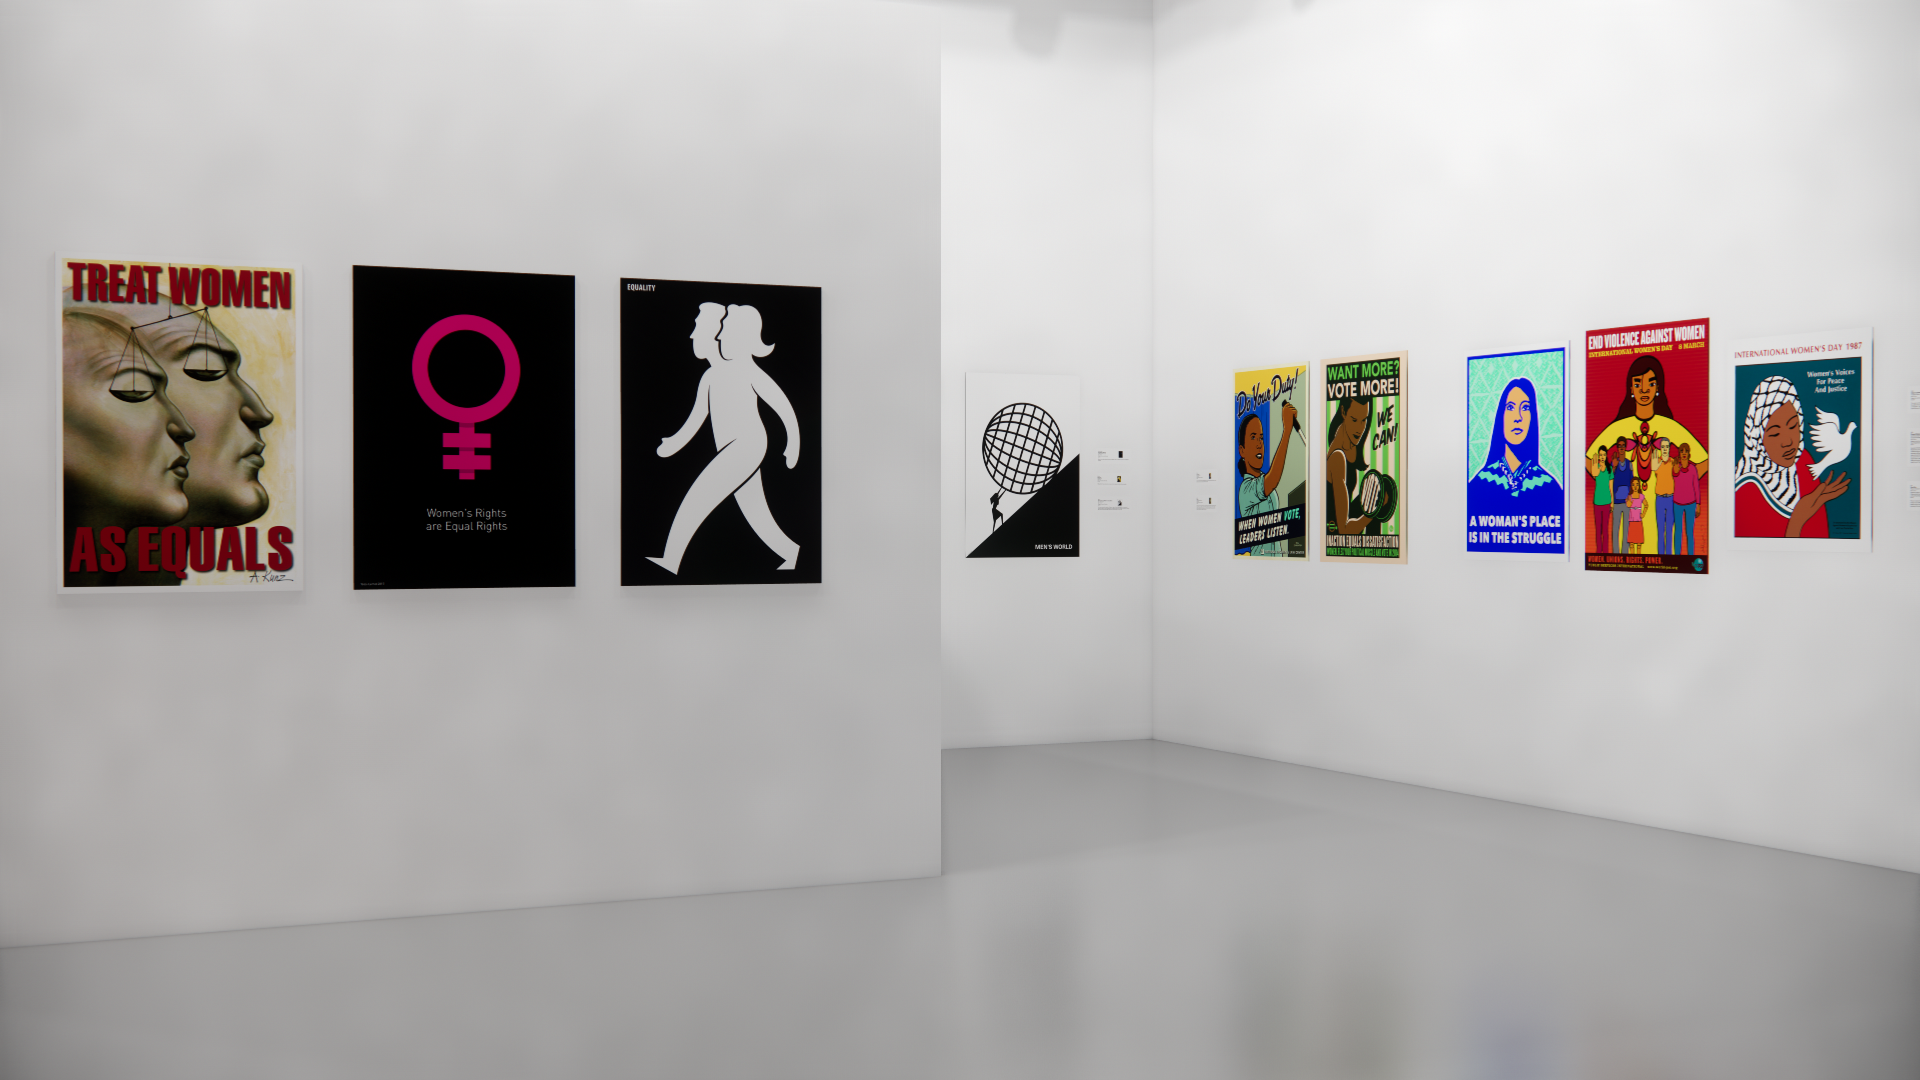 Installation View, Front West Gallery, Women's Rights are Human Rights Exhibition, Sept 15, 2021 to Dec 1, 2021